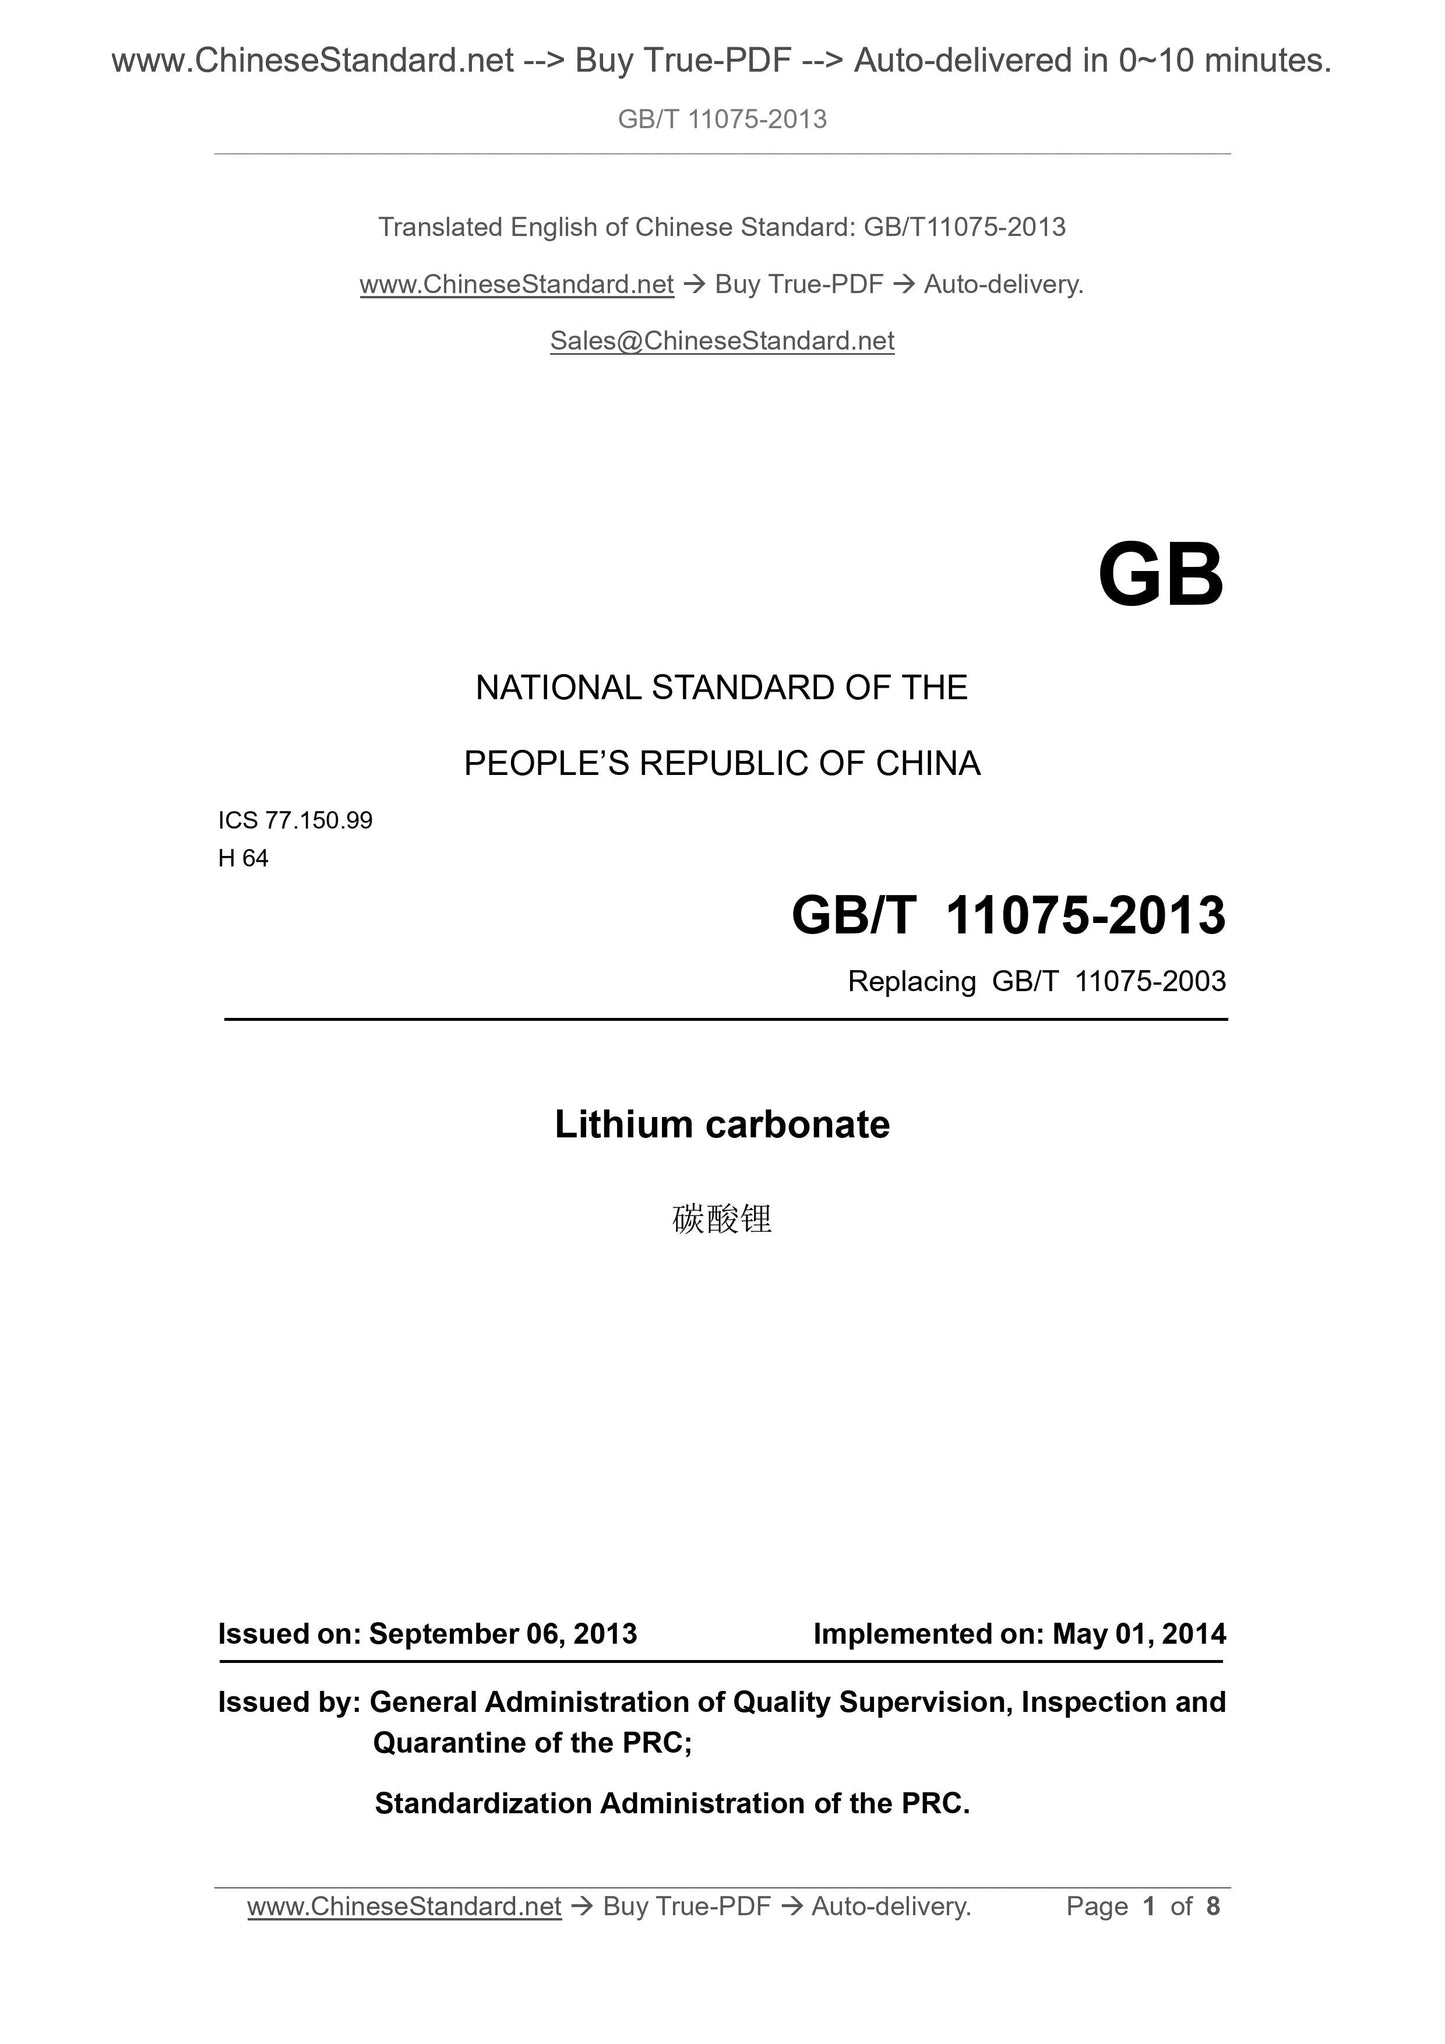 GB/T 11075-2013 Page 1